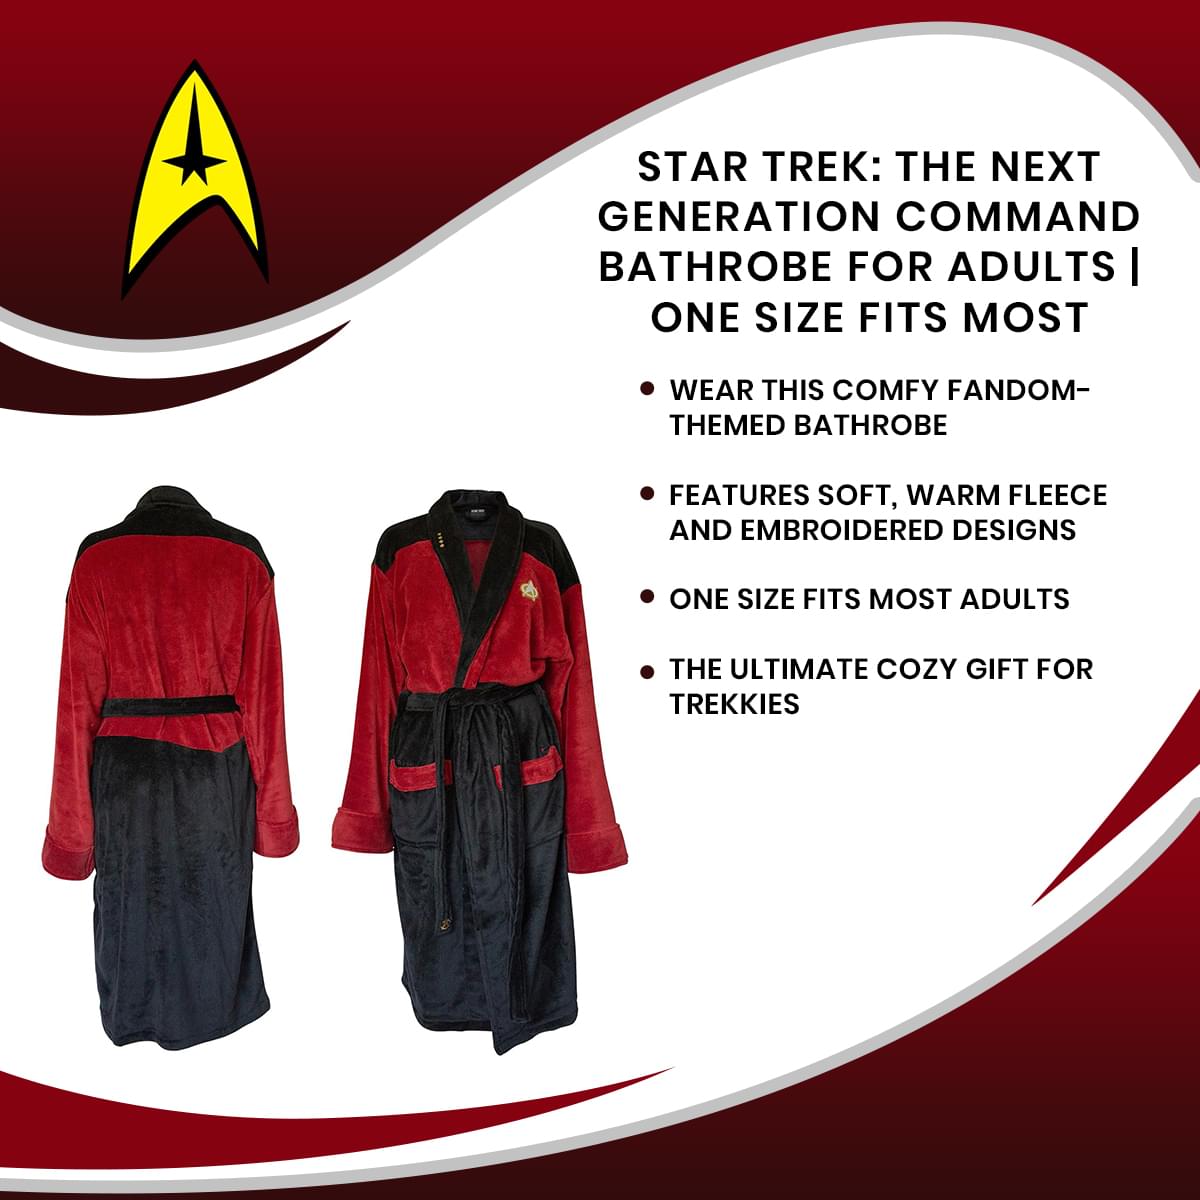 Star Trek: The Next Generation Command Bathrobe for Adults | One Size Fits Most